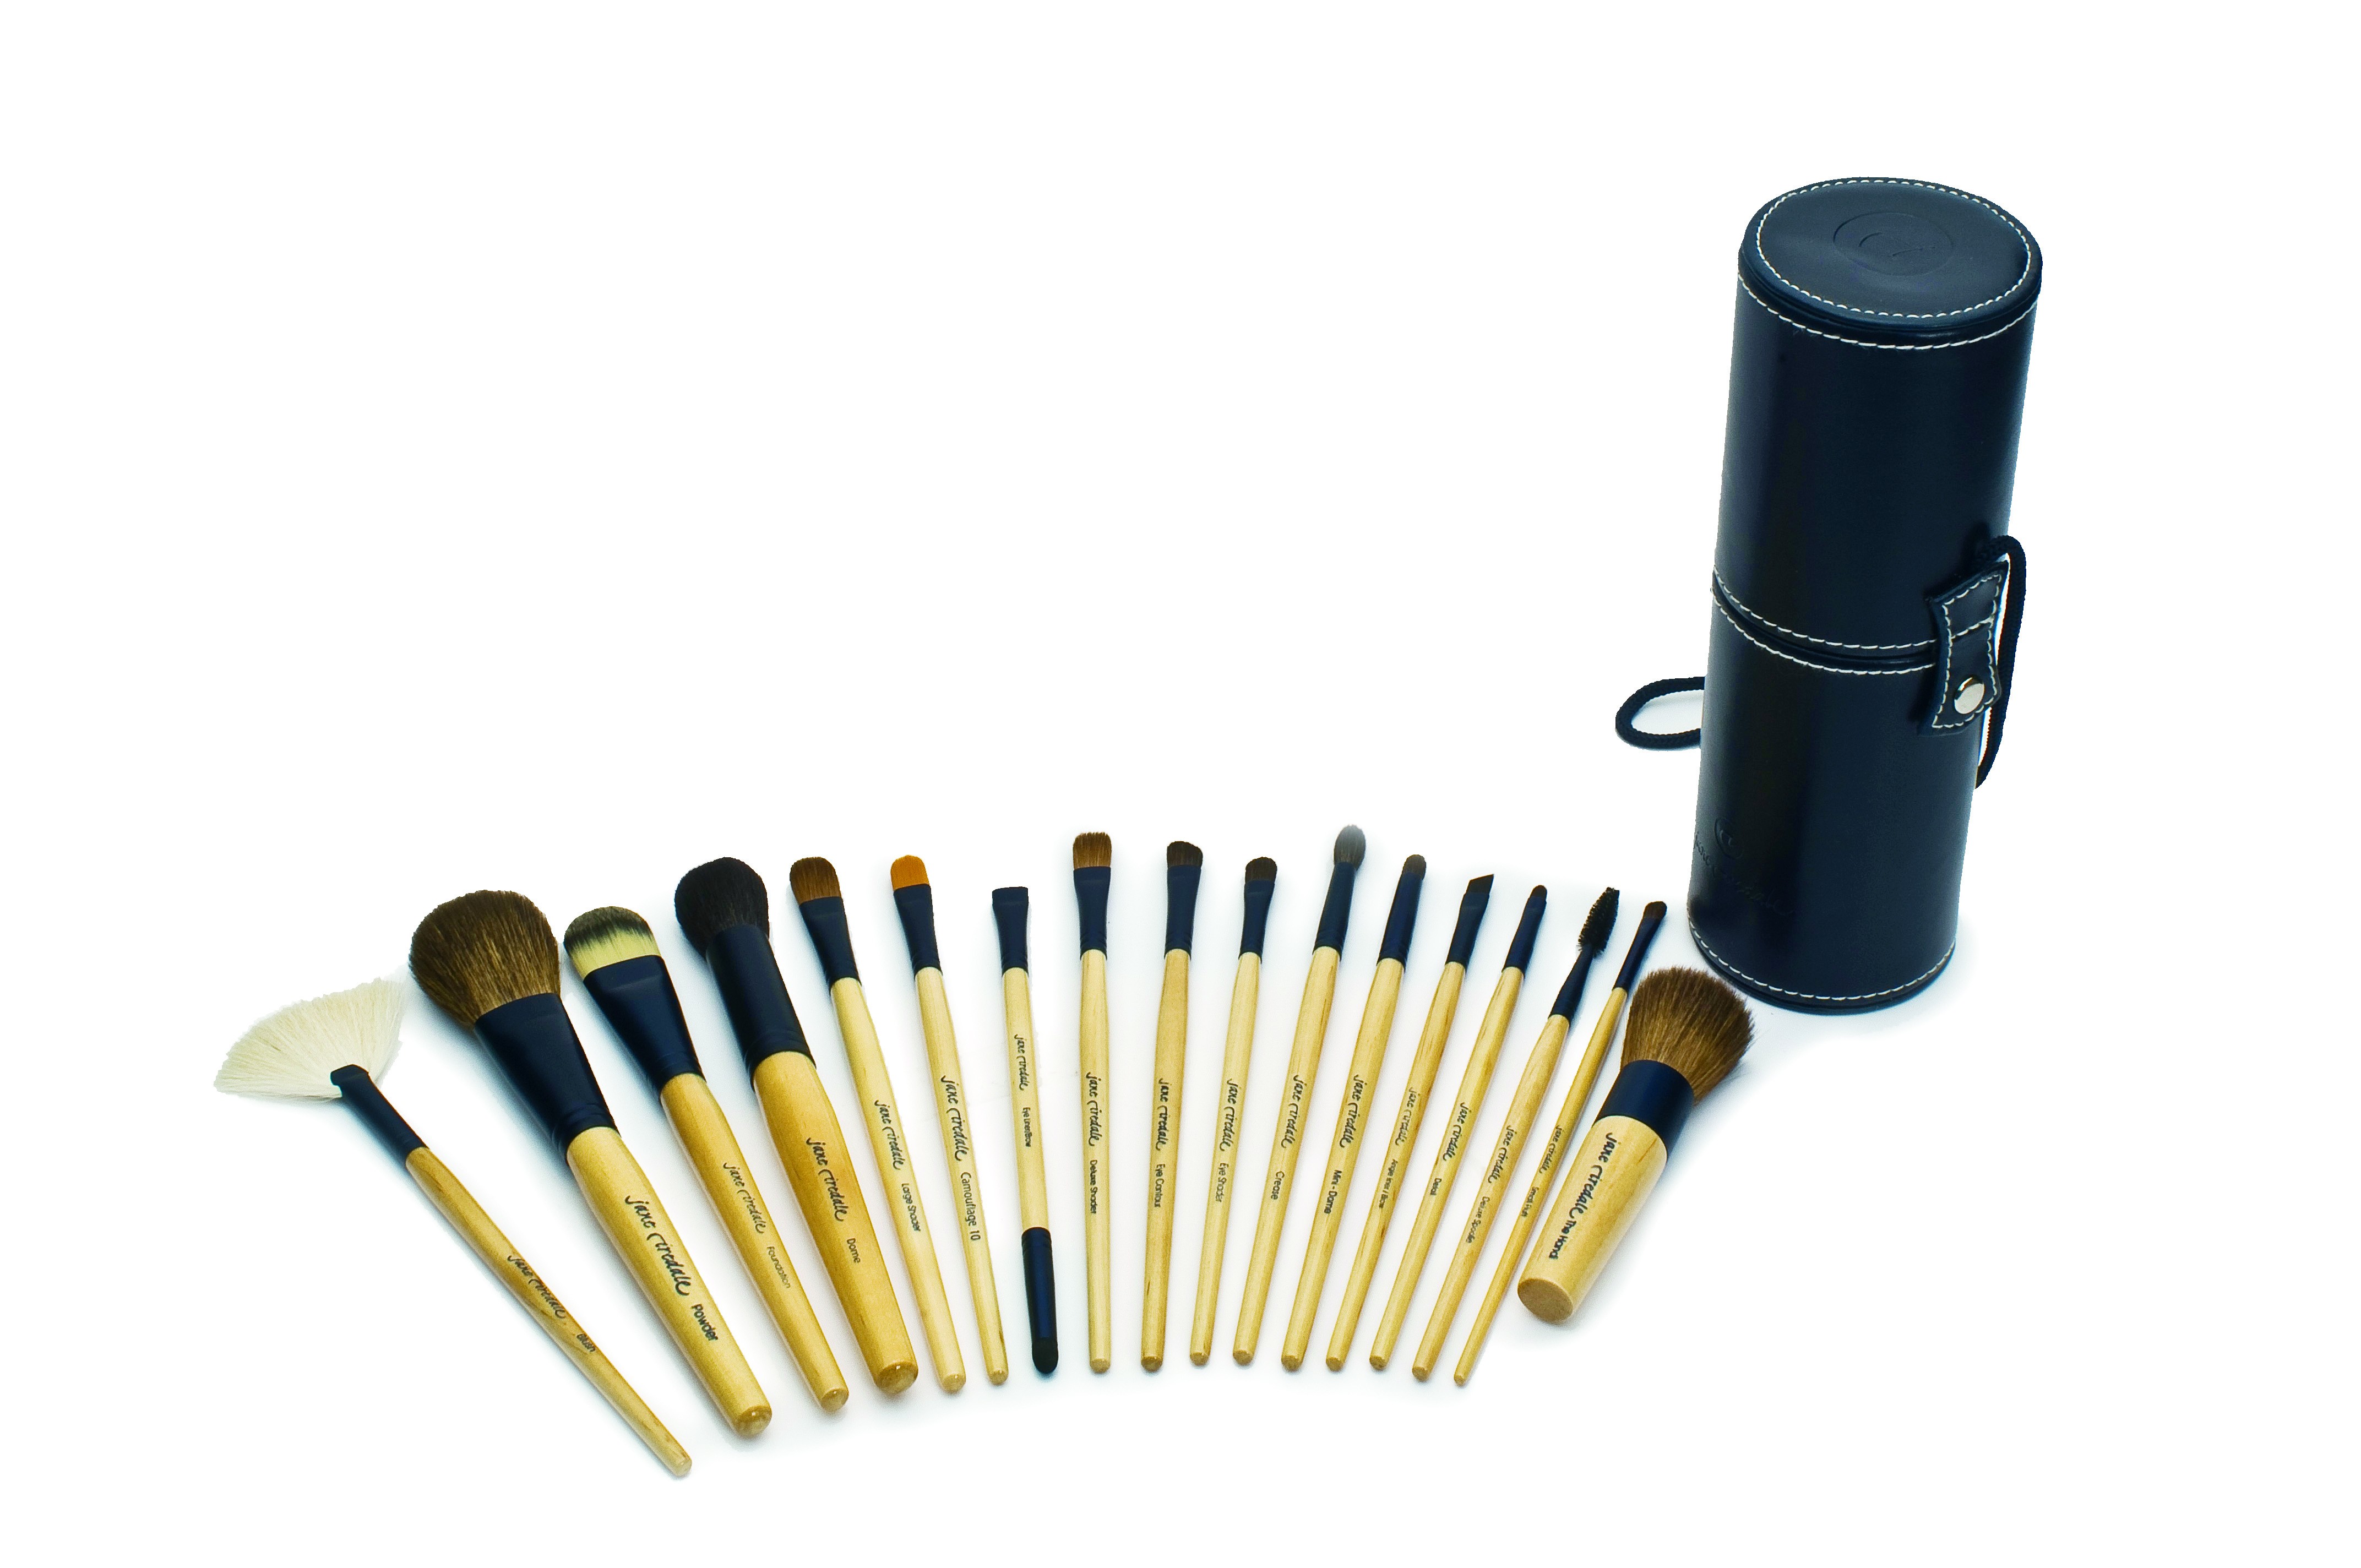 Limited Inspicere gennemsnit Jane Iredale Professional Brush Kit at The Love Organics Company